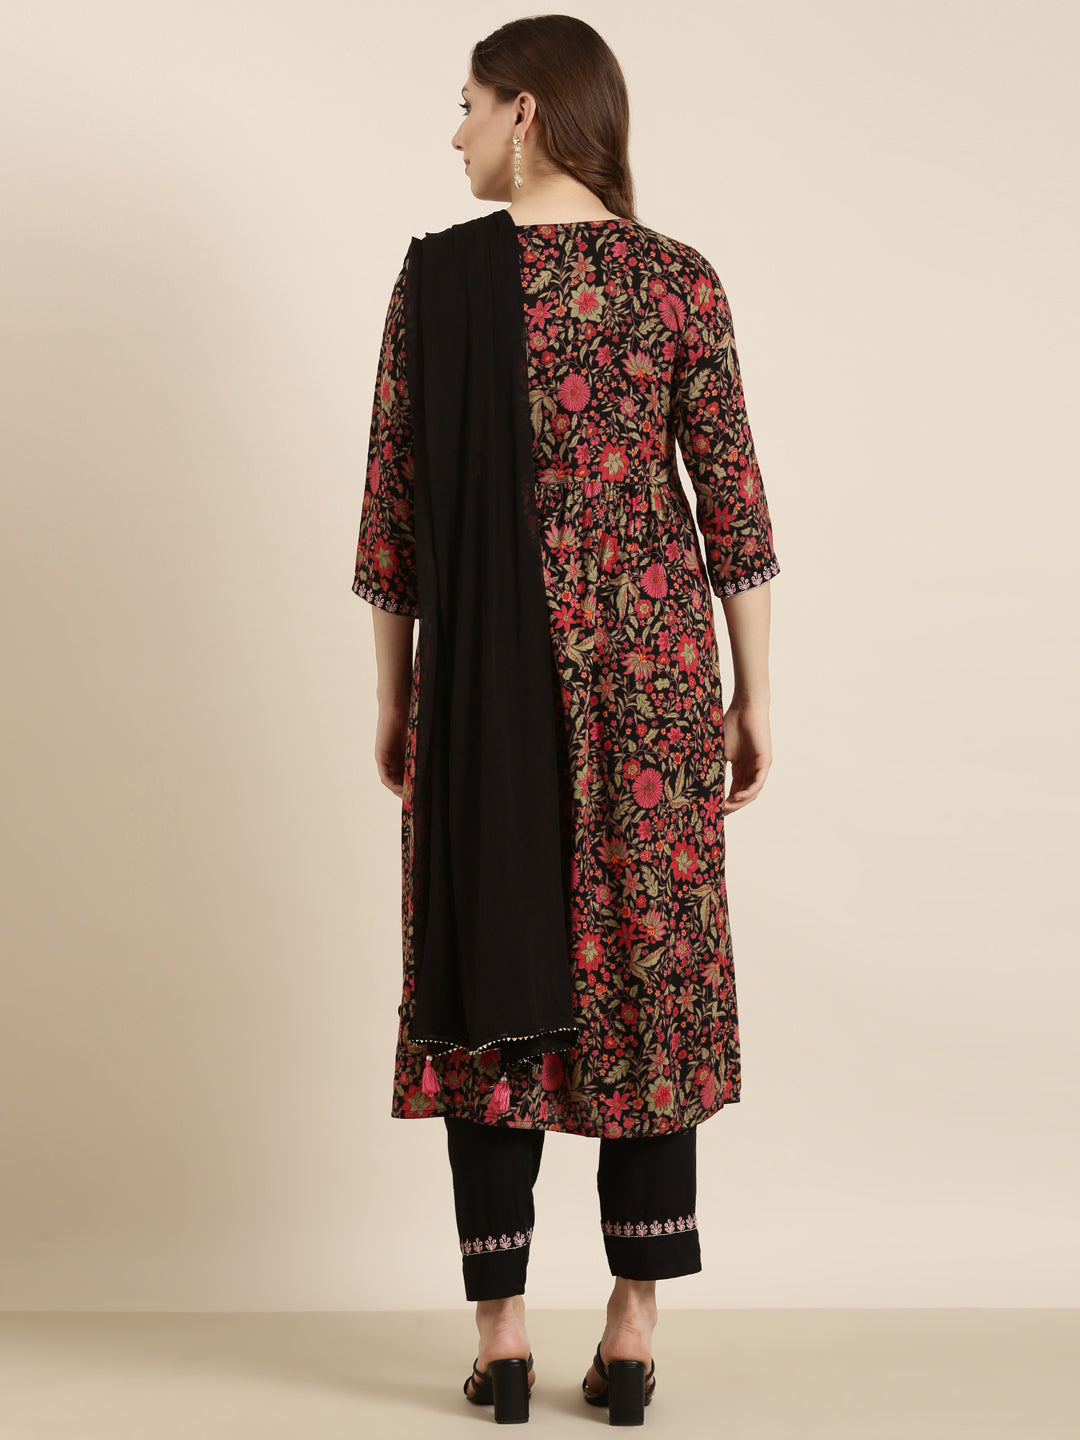 Women A-Line Black Floral Kurta and Trousers Set Comes With Dupatta